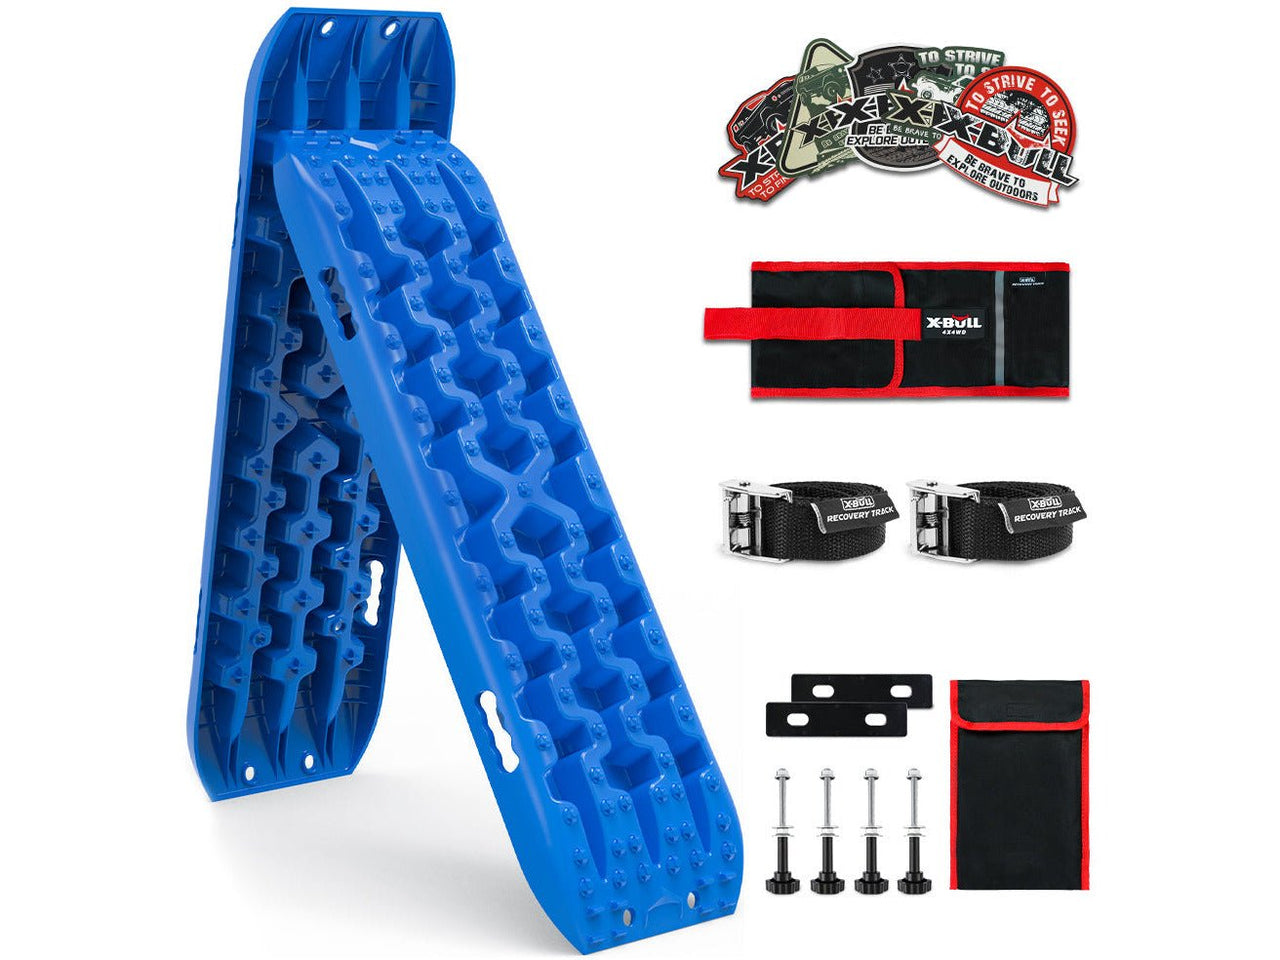 Buy X-BULL 4X4 Recovery Tracks Kit With Tote Carry Bag -Blue - Gen3.0 (1 Pair) - Mud Tracks